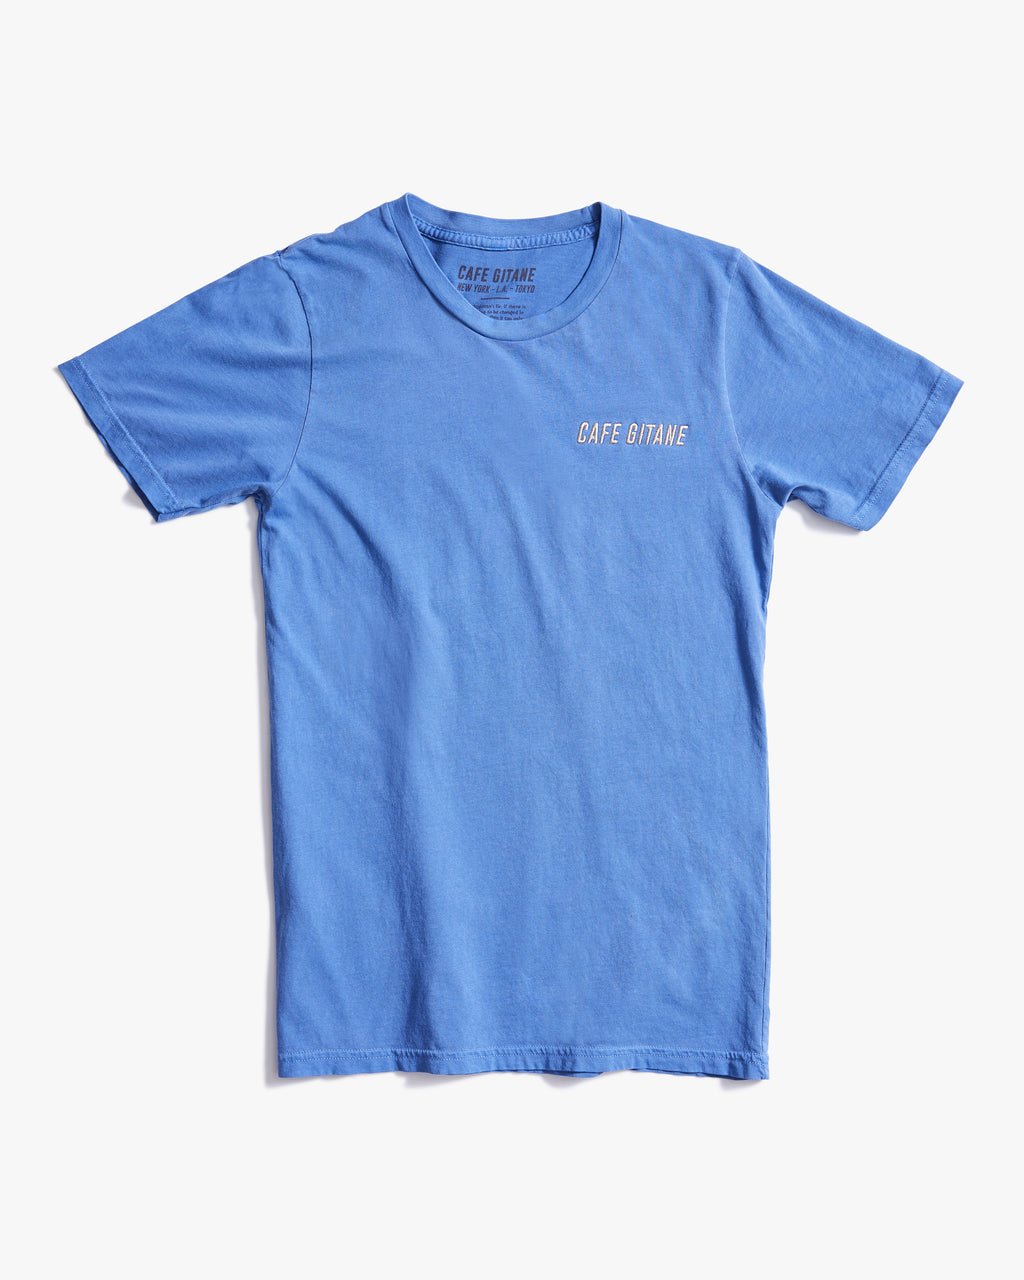 The Cafe Gitane Vintage Wash Embroidered Tee is 100% ring spun cotton and made in the USA. The classic t-shirt in sky blue is embroidered on the left chest in a silver-gray thread. The t-shirt is pigment dyed which means that it has a sublet vintage look and will get more wash the older it gets.